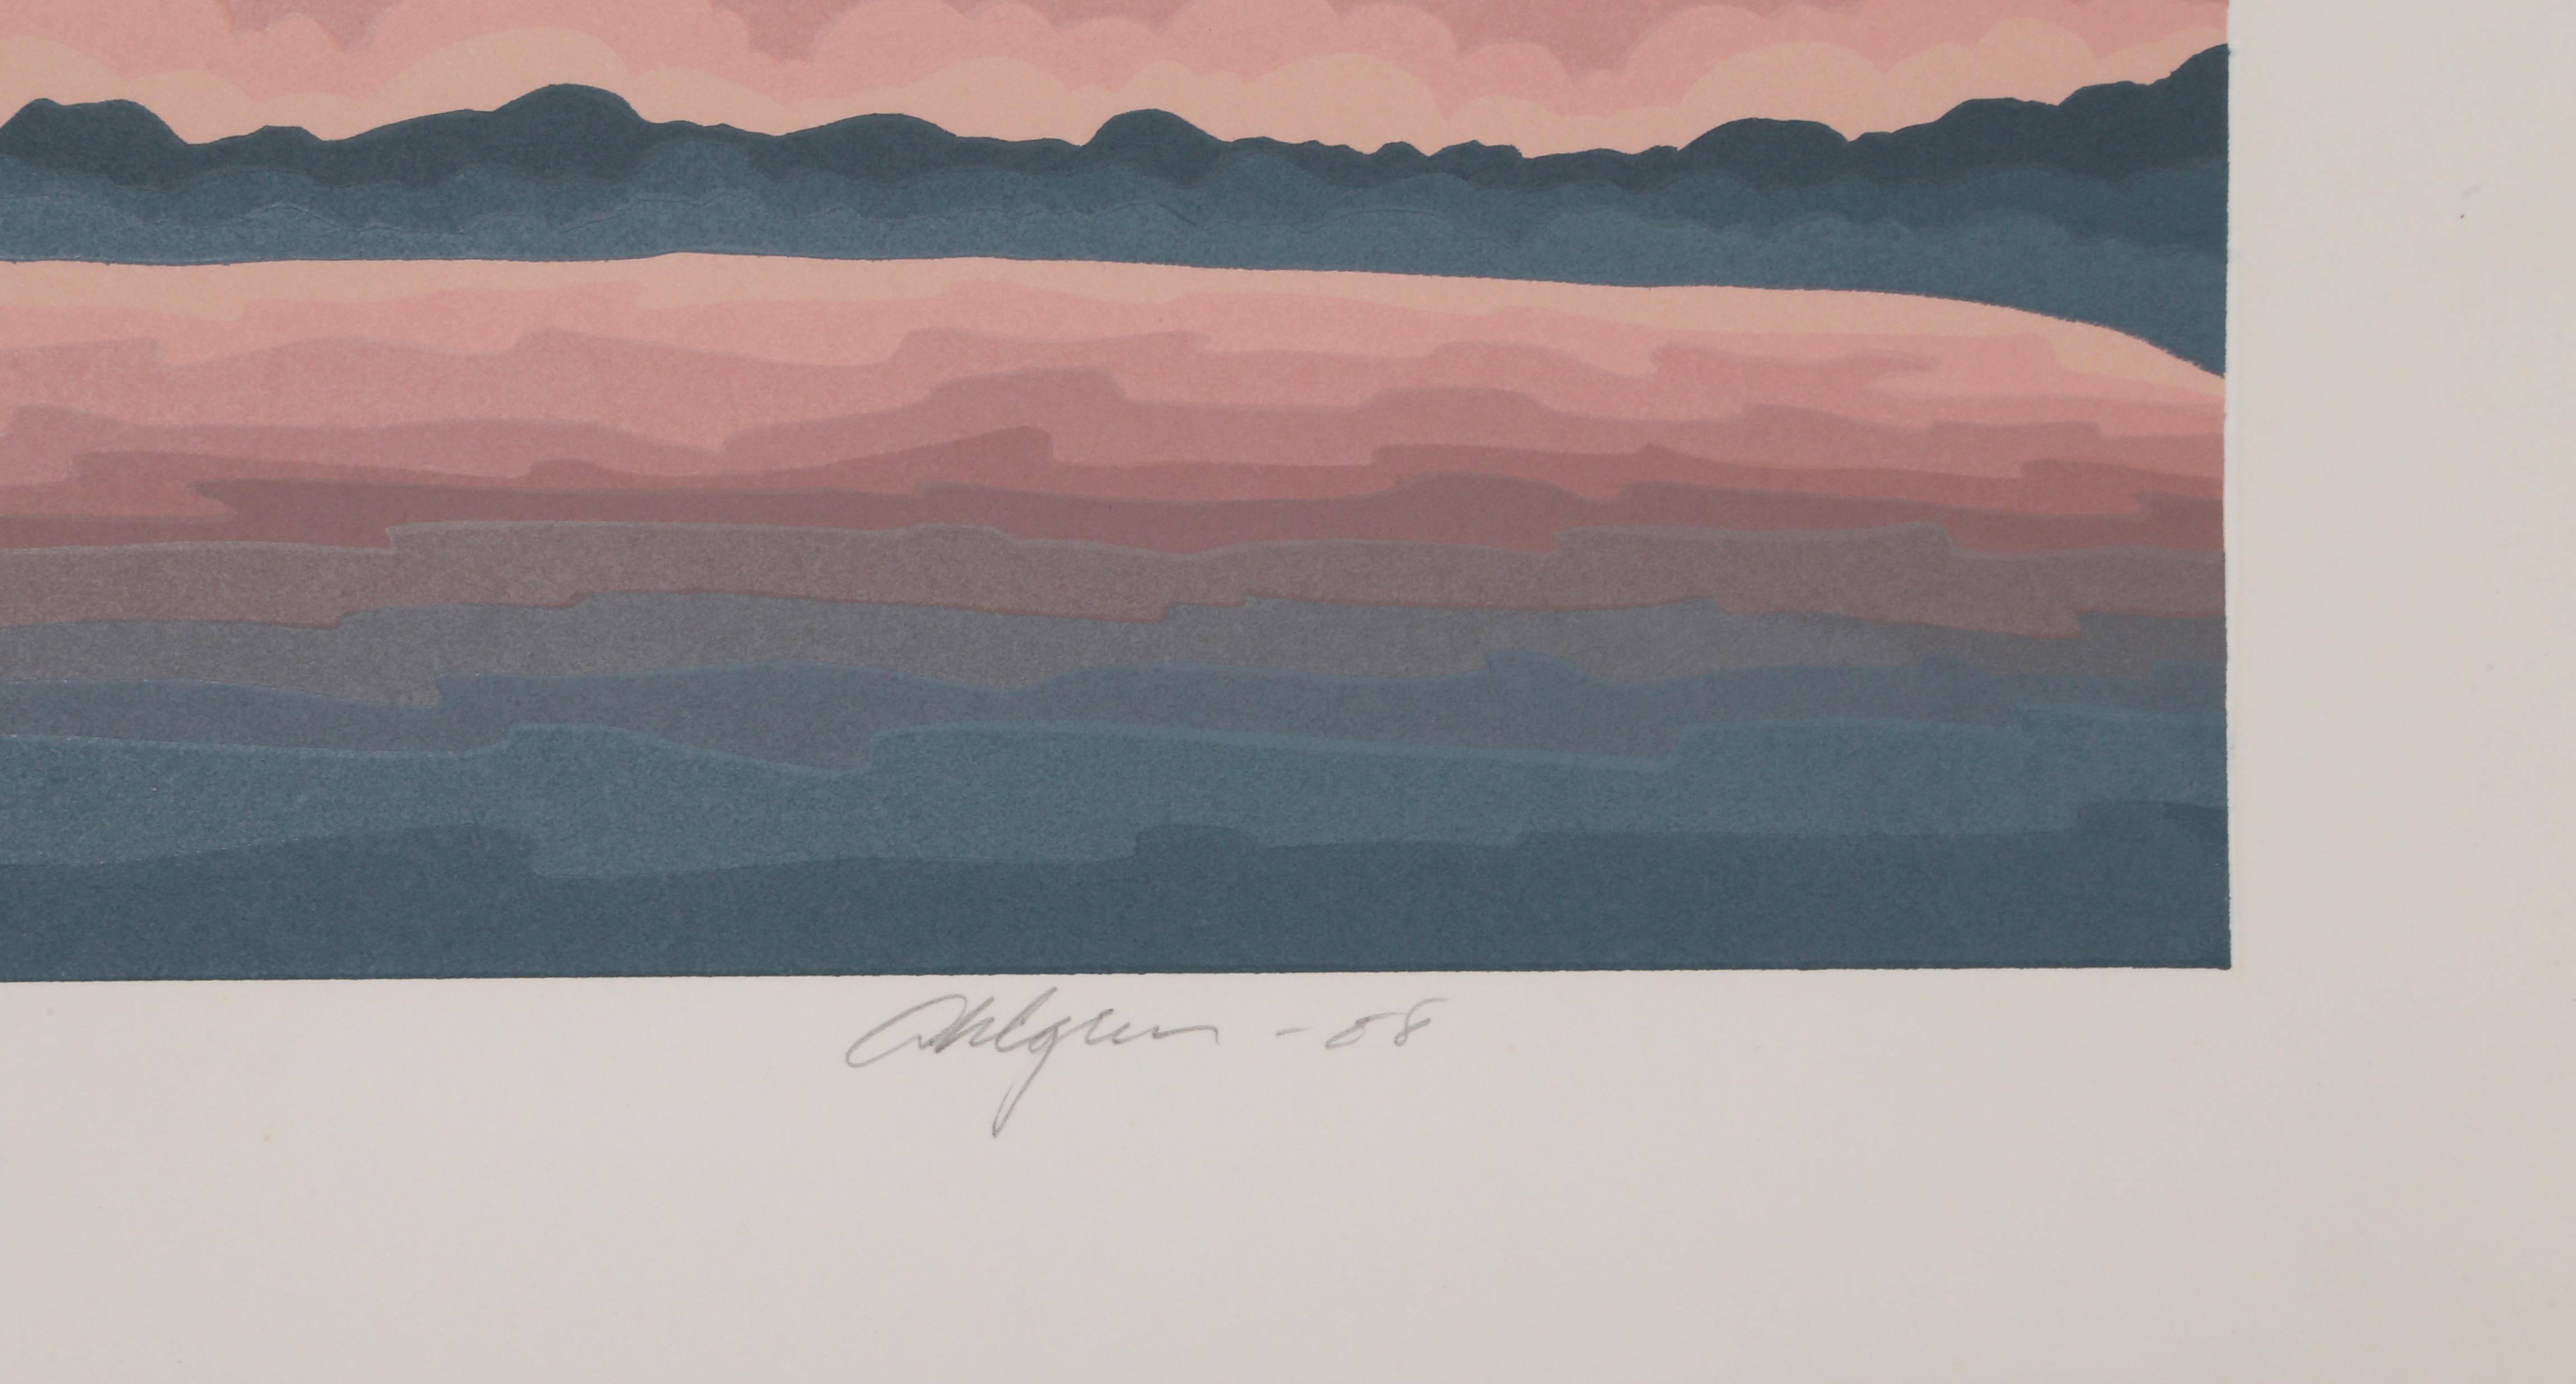 Artist: Roy Ahlgren, American (1927 - 2011)
Title: Safe Harbor
Year: 1988
Medium: Serigraph, signed, titled, dated, and numbered in pencil
Edition: 11/100
Size: 22 x 30 in. (55.88 x 76.2 cm)